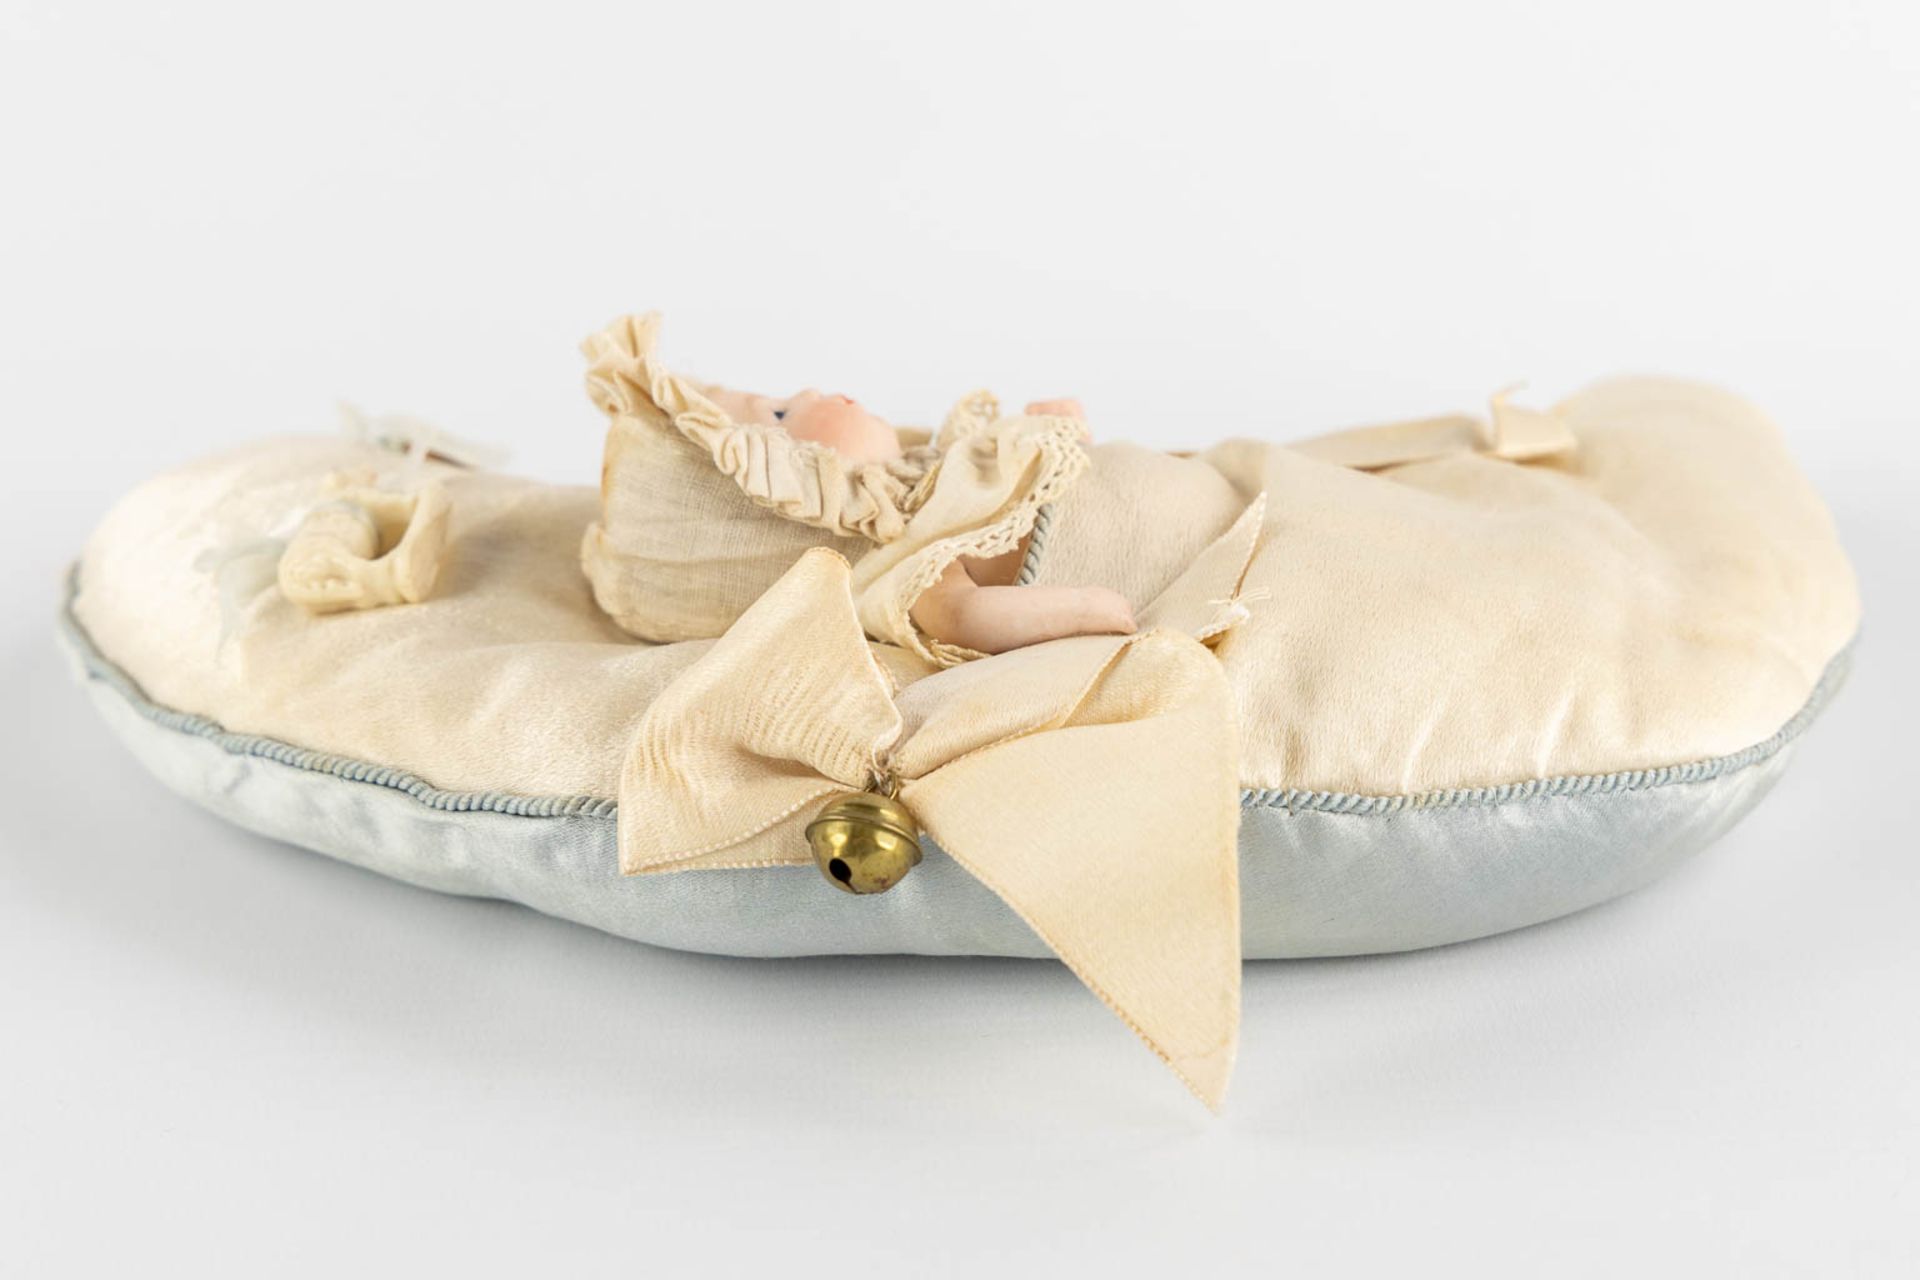 An antique doll in a crescent moon-shaped sleeping bag. Putnam 1922. (W:23 x H:26 cm) - Image 7 of 13